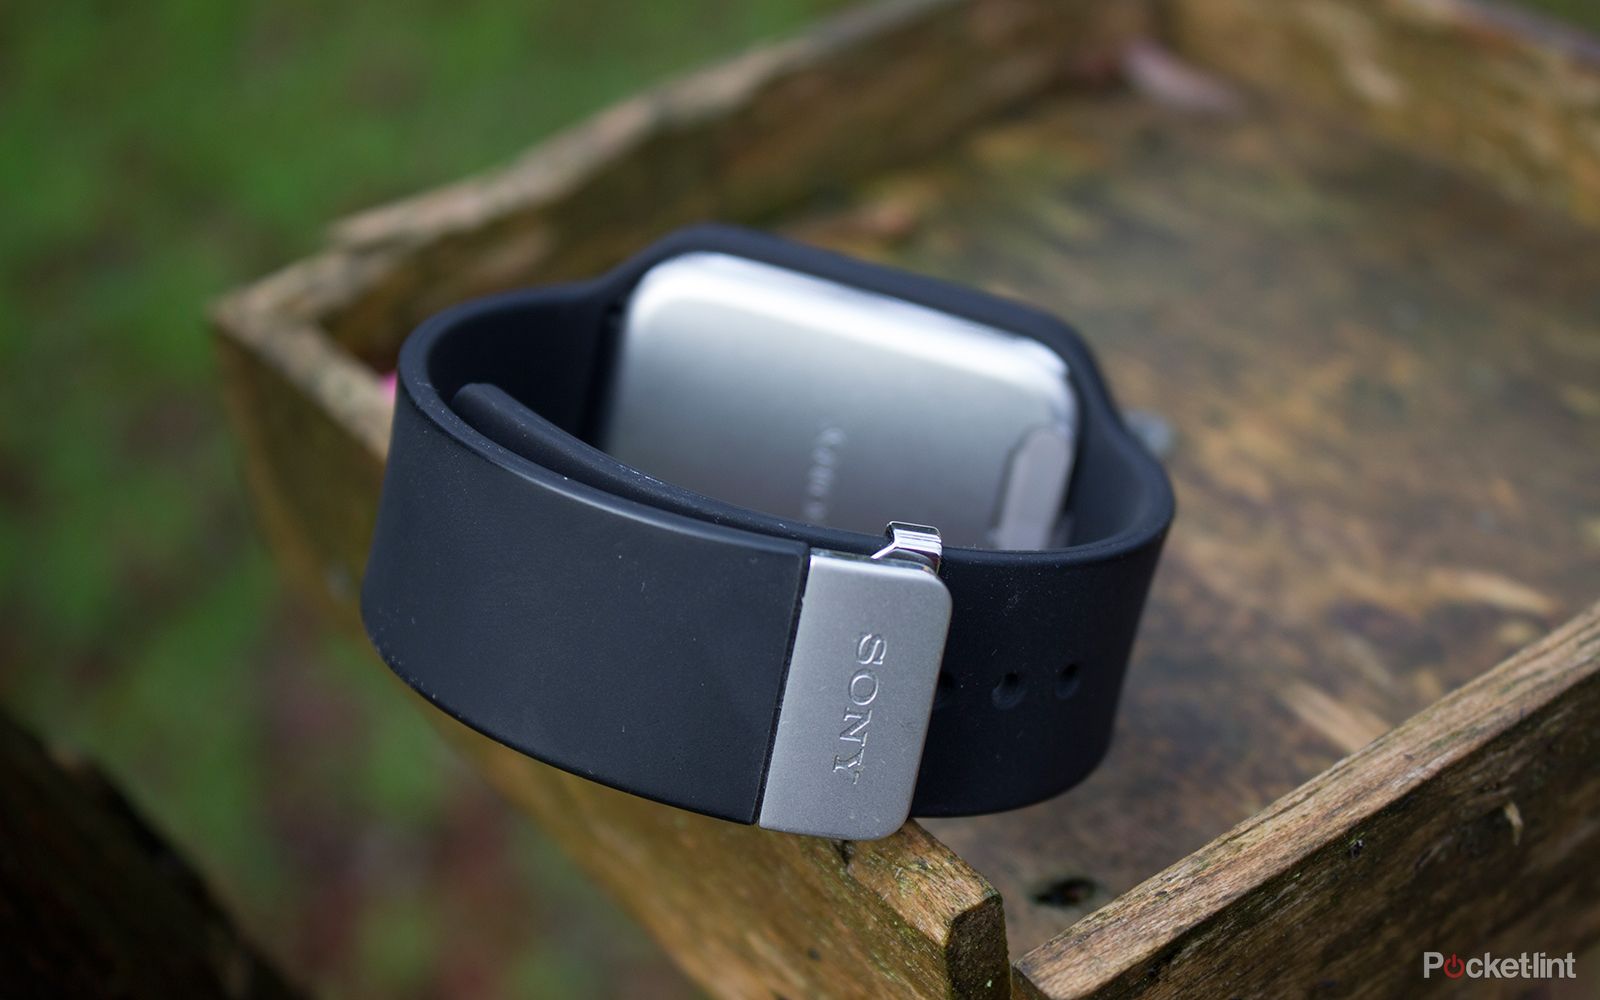 sony smartwatch 3 review image 6